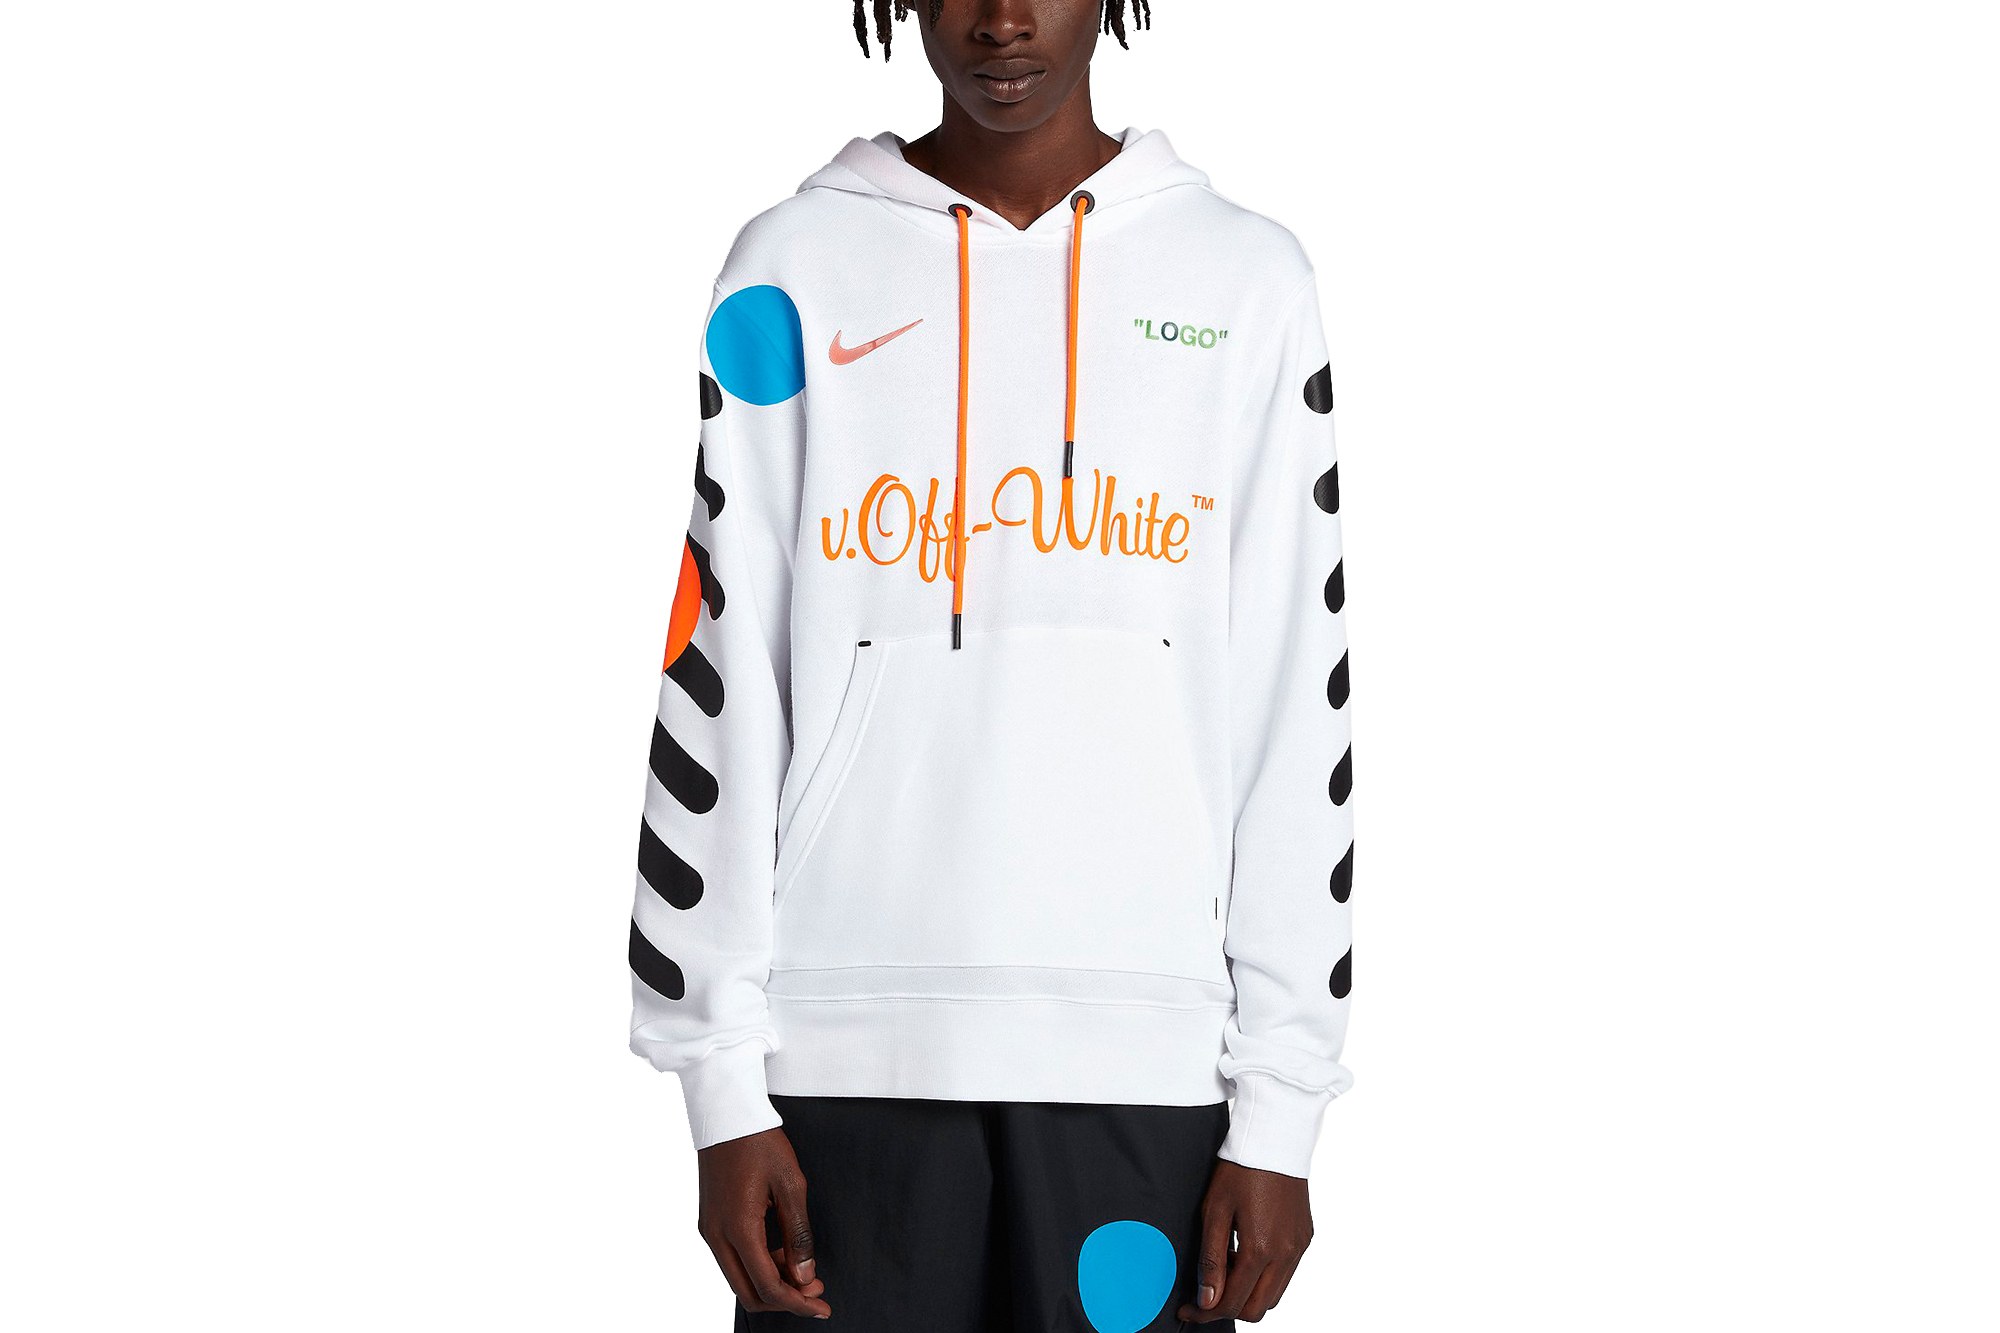 2018-06_gq_world-cup-off-white_3x2